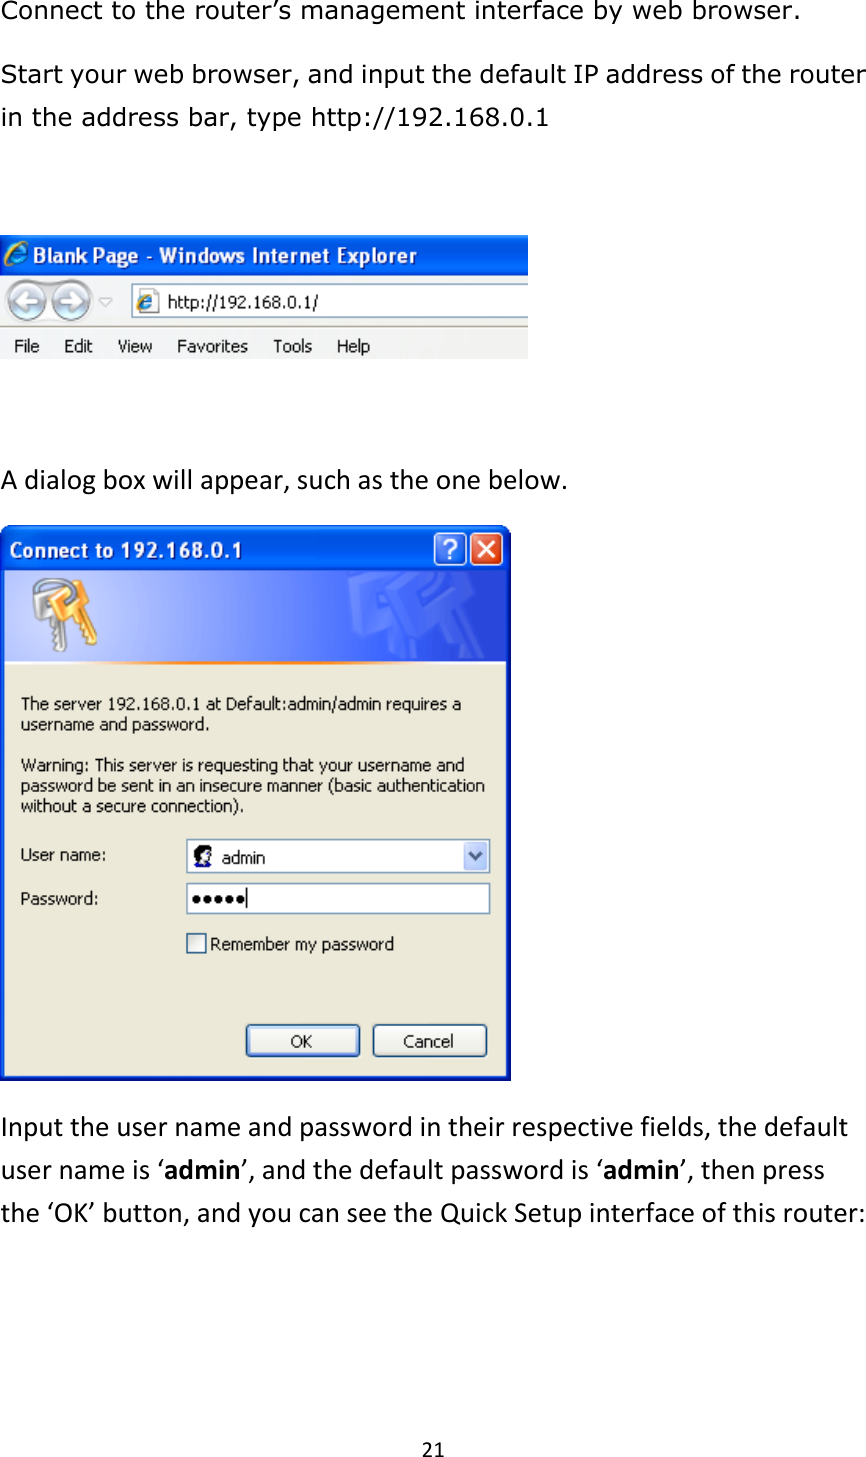 21 Connect to the router’s management interface by web browser. Start your web browser, and input the default IP address of the router in the address bar, type http://192.168.0.1    A dialog box will appear, such as the one below.    Input the user name and password in their respective fields, the default user name is ‘admin’, and the default password is ‘admin’, then press the ‘OK’ button, and you can see the Quick Setup interface of this router:  